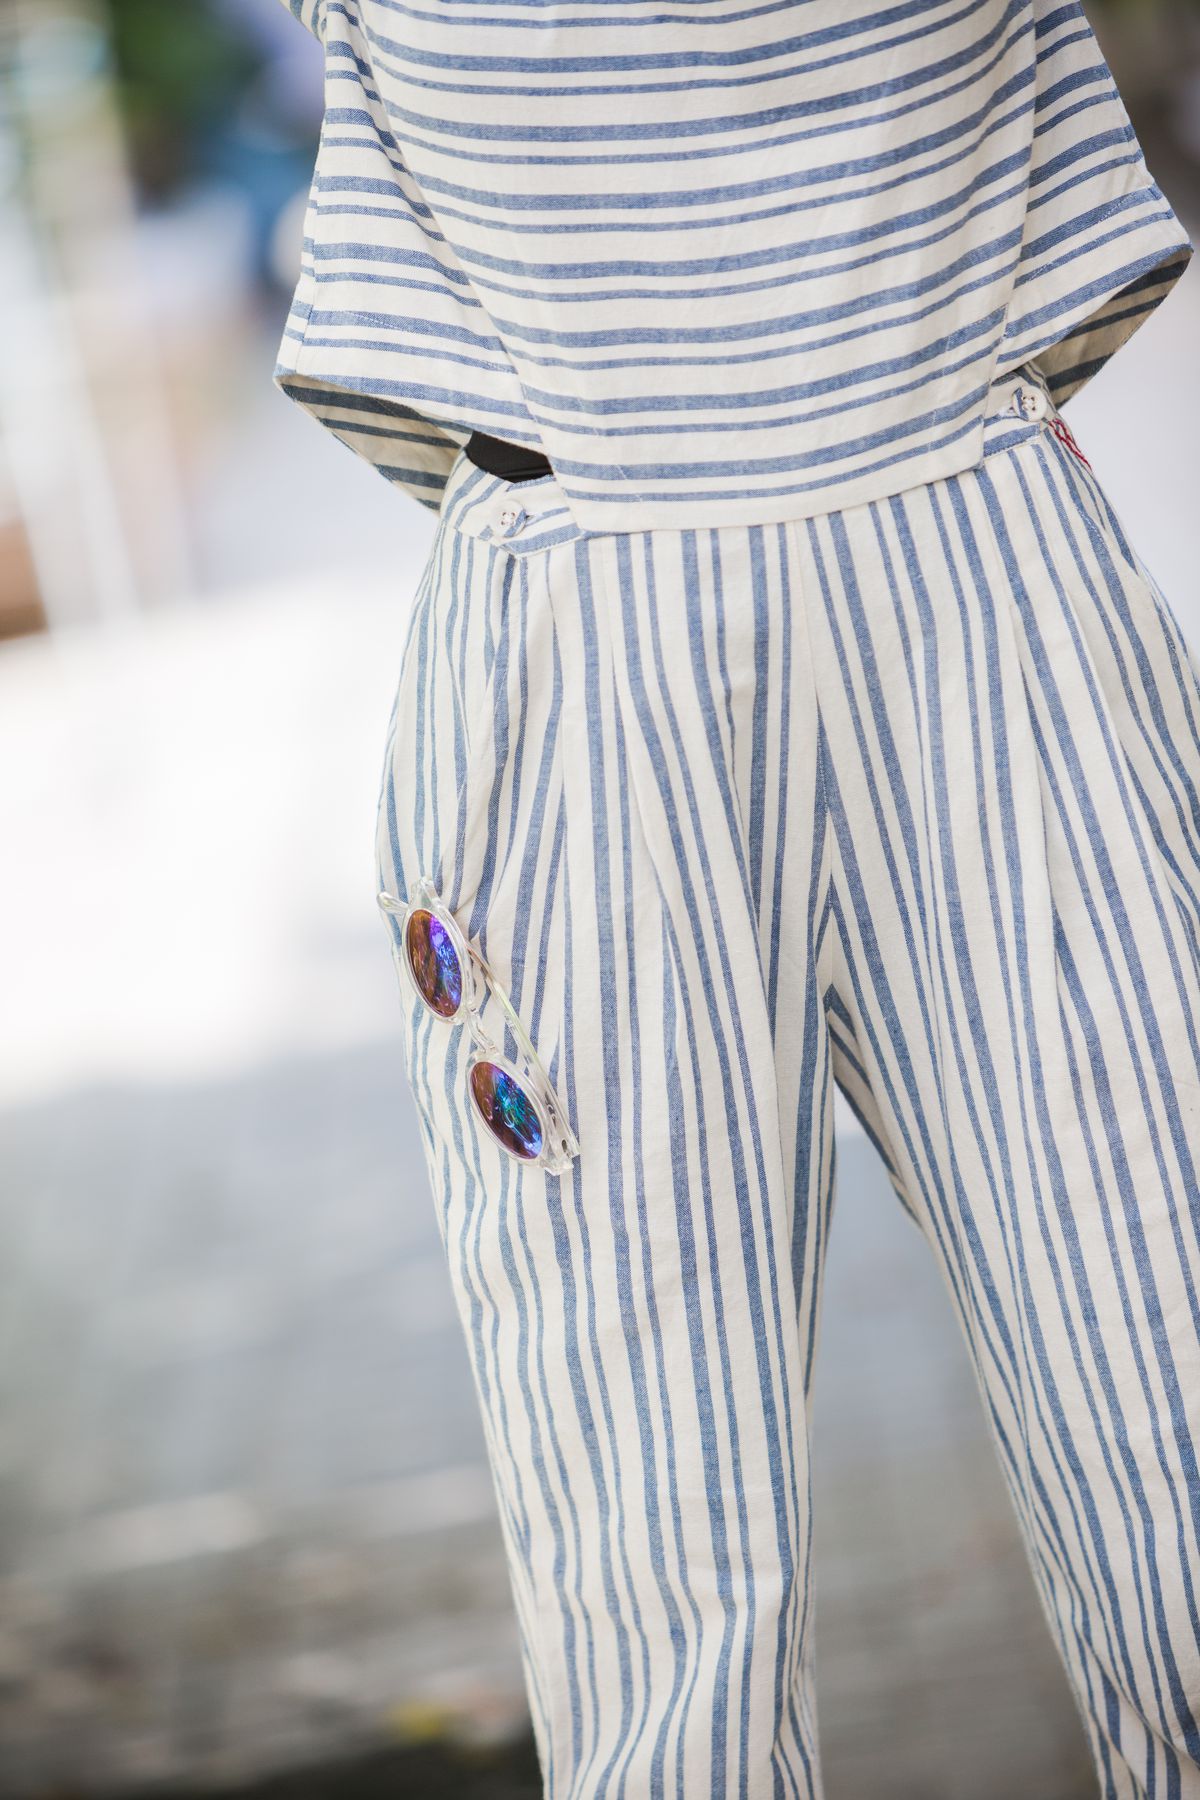 A detail of the striped jumpsuit